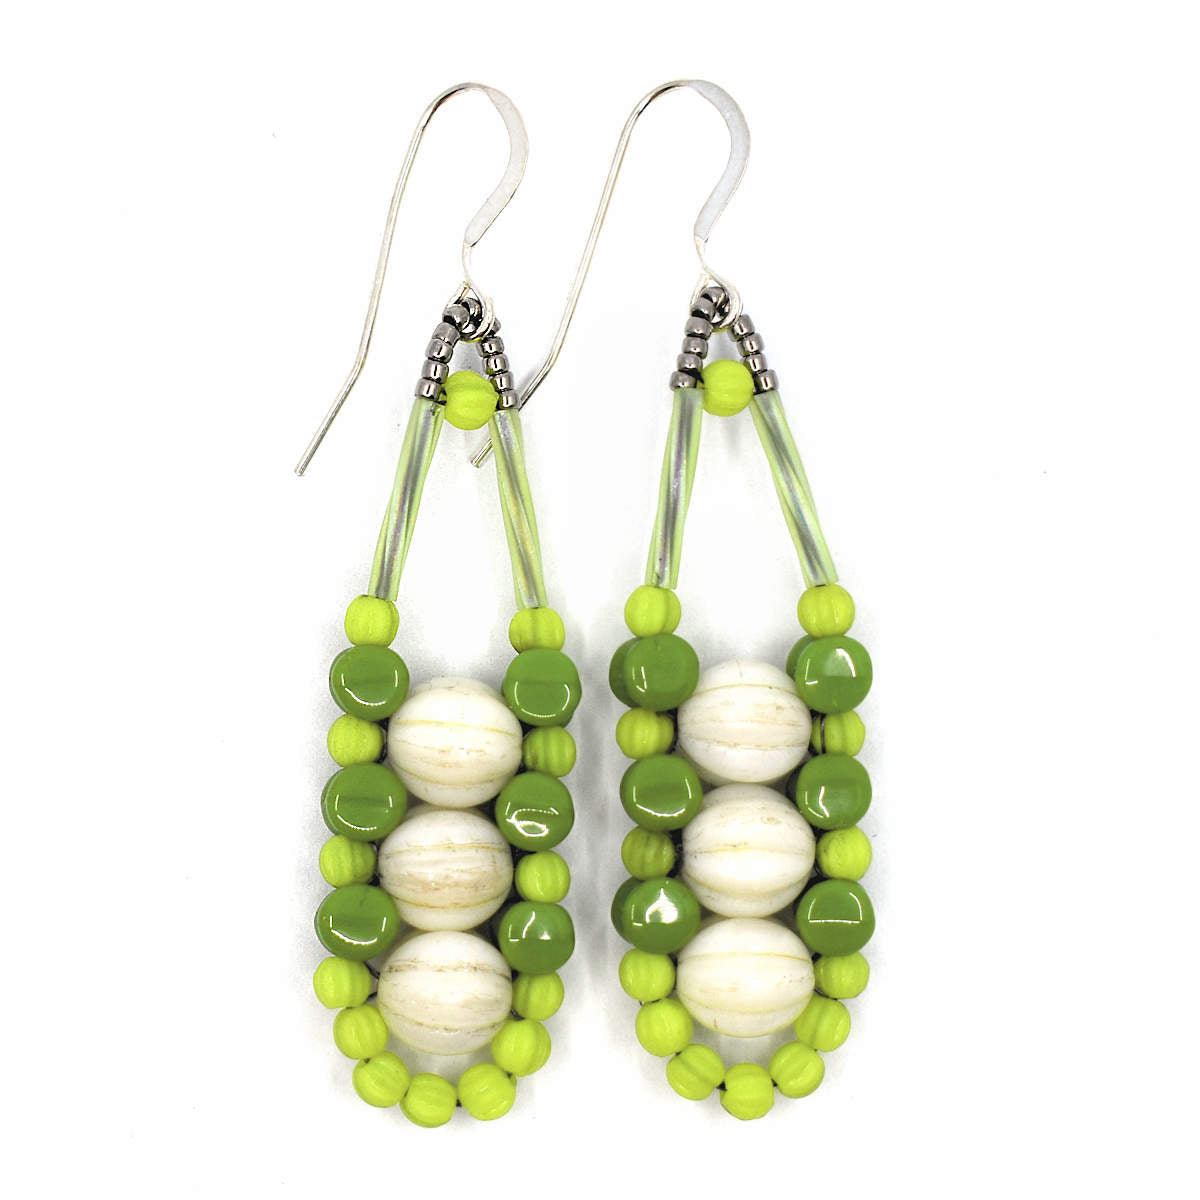 Cream and green earrings with silver accents and ear wires on a white background. These earrings have three cream rounds stacked vertically like peas and held in place by an outline of bright chartreuse and darker avocado green beads. 